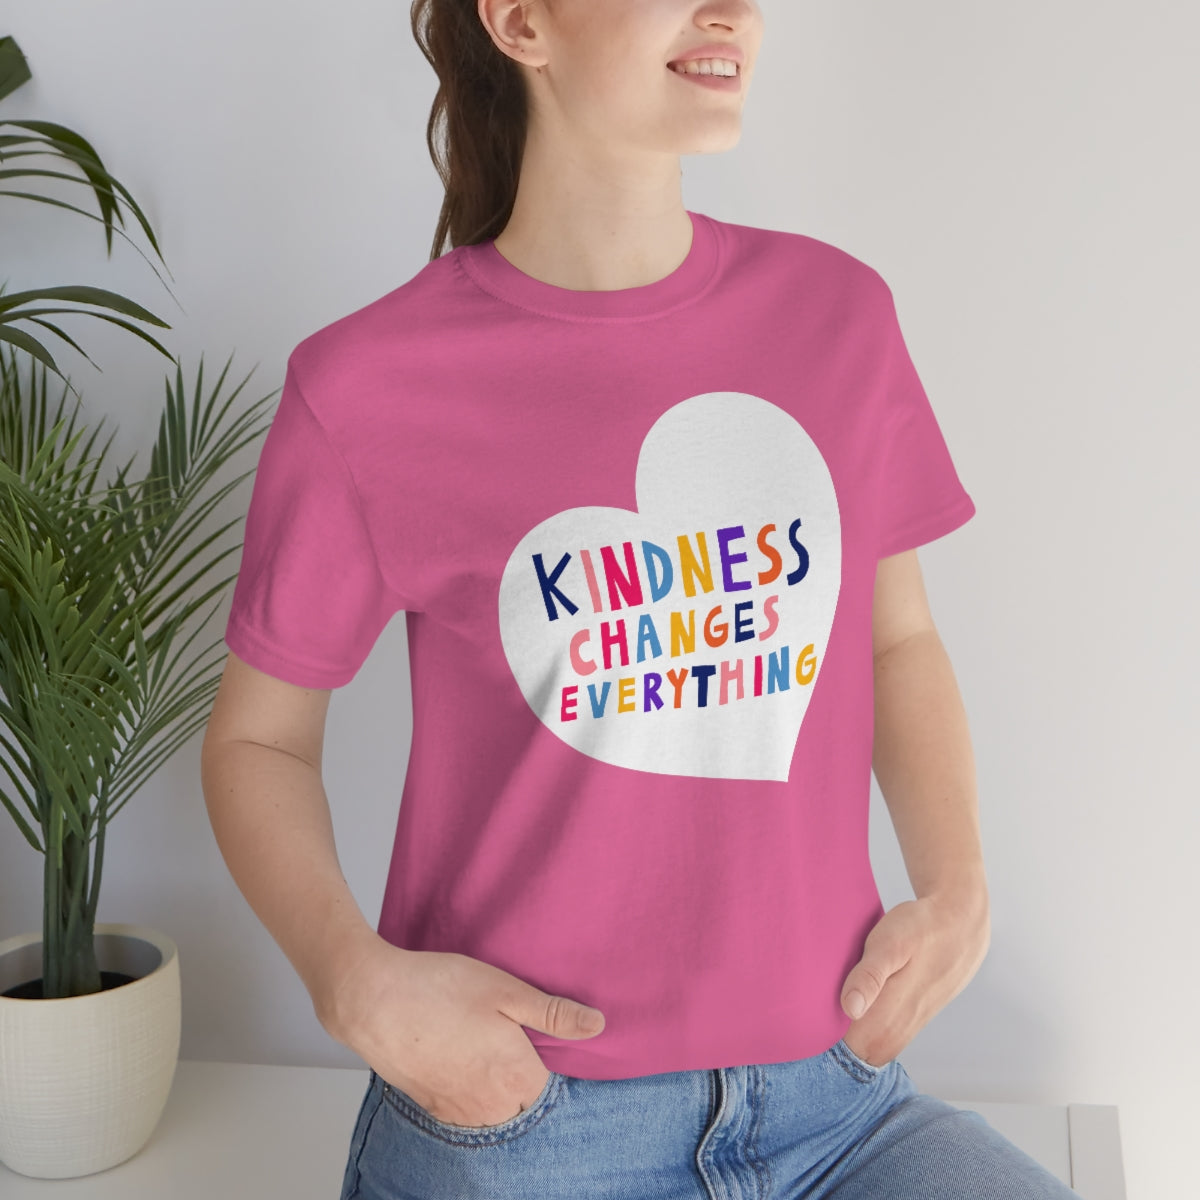 Unisex Jersey Short Sleeve Tee "Pink shirt DAY Kindness changes everything"